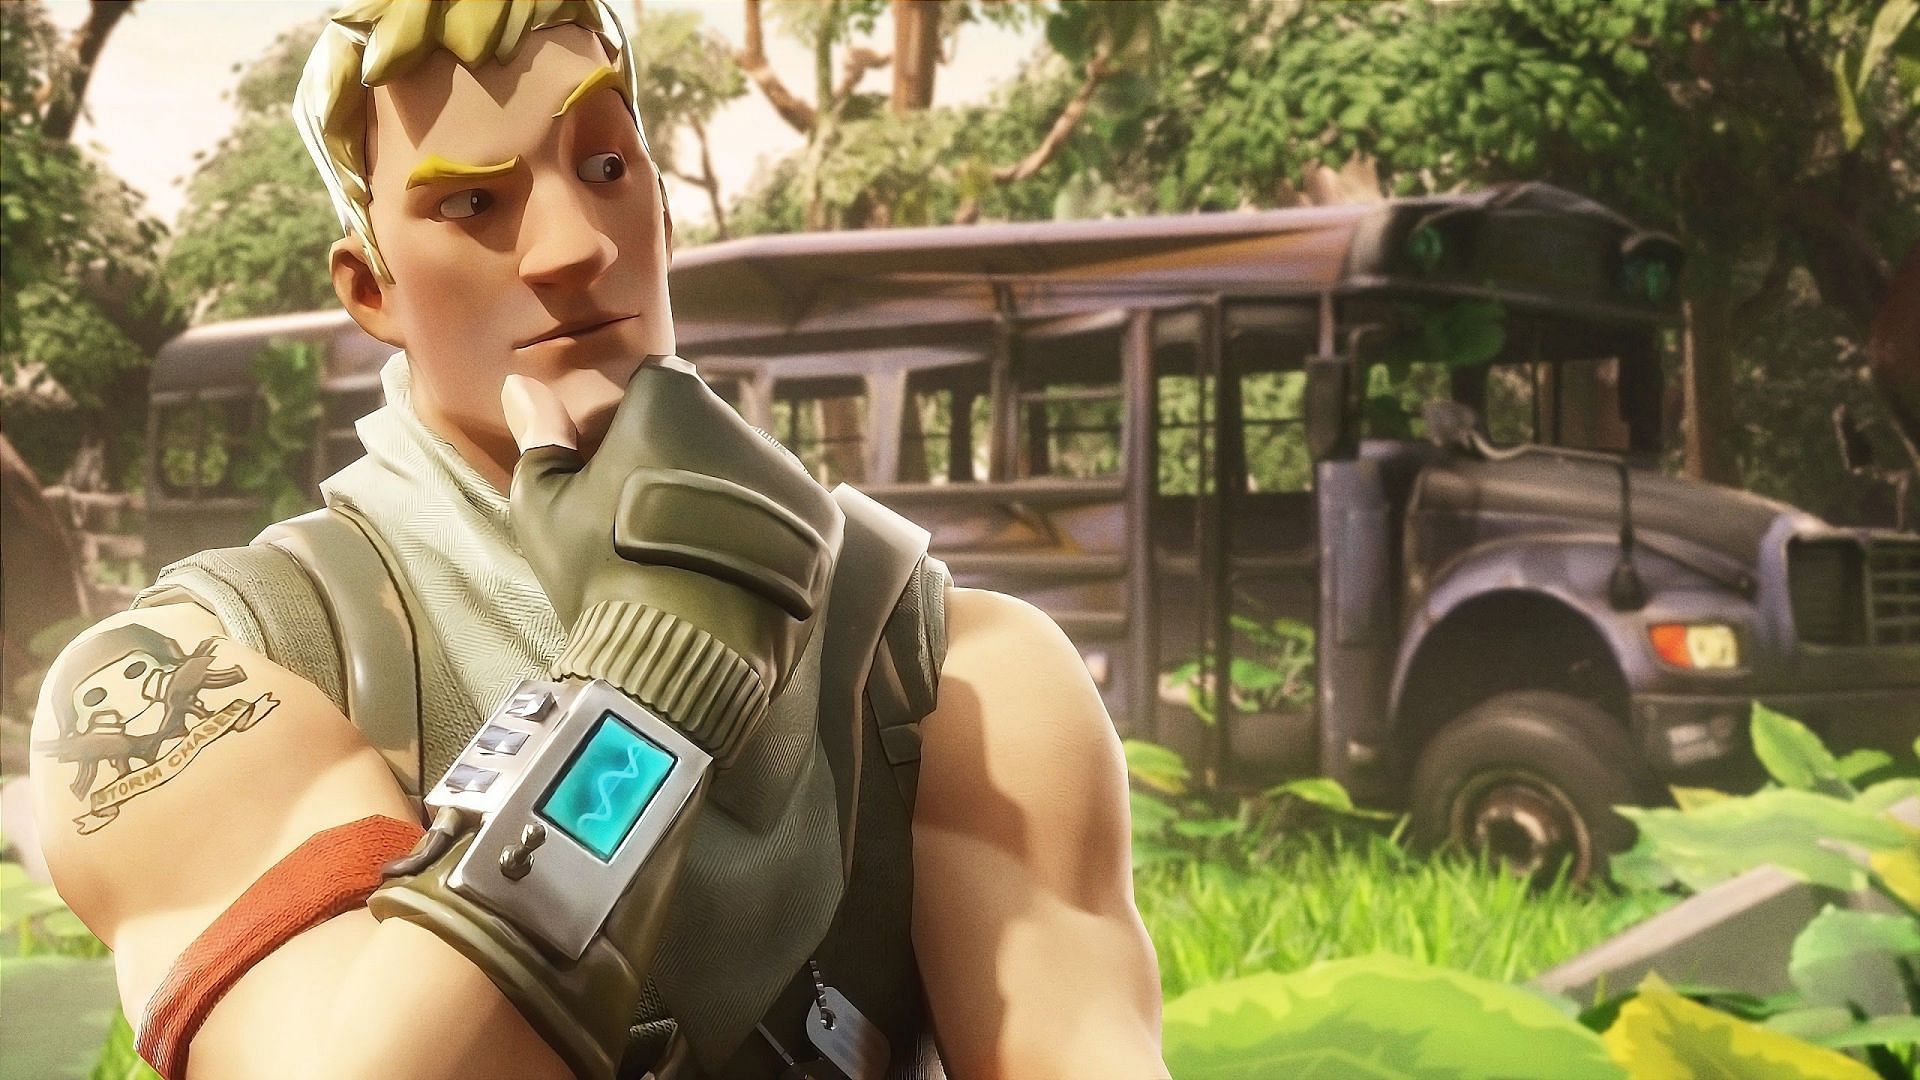 Jonesy received a real-life look resembling his model in Fortnite (Image via Epic Games)